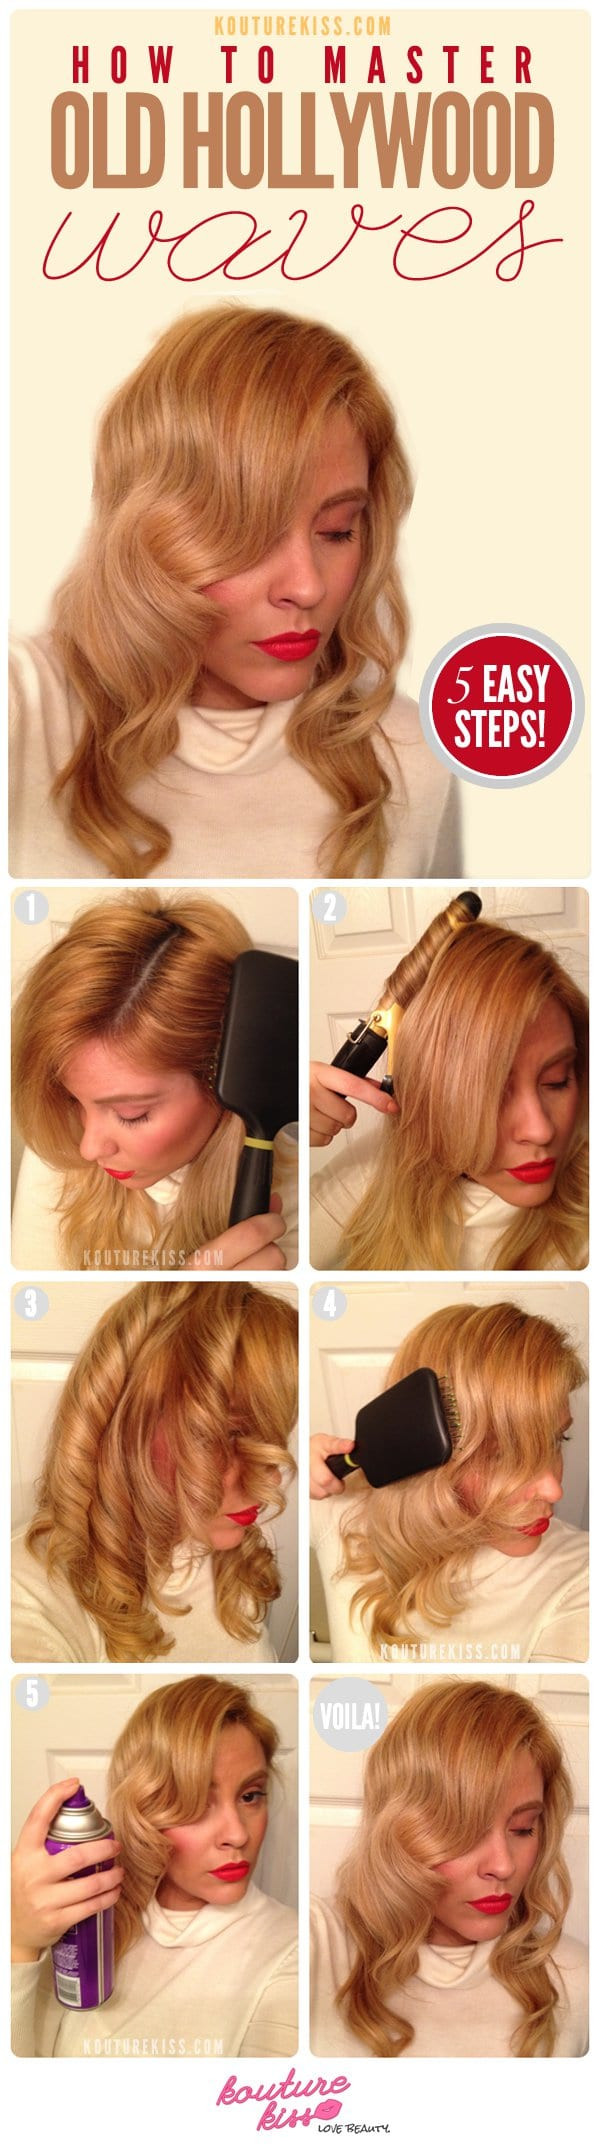 Cute Diy Hairstyles
 17 Easy DIY Tutorials For Glamorous and Cute Hairstyle